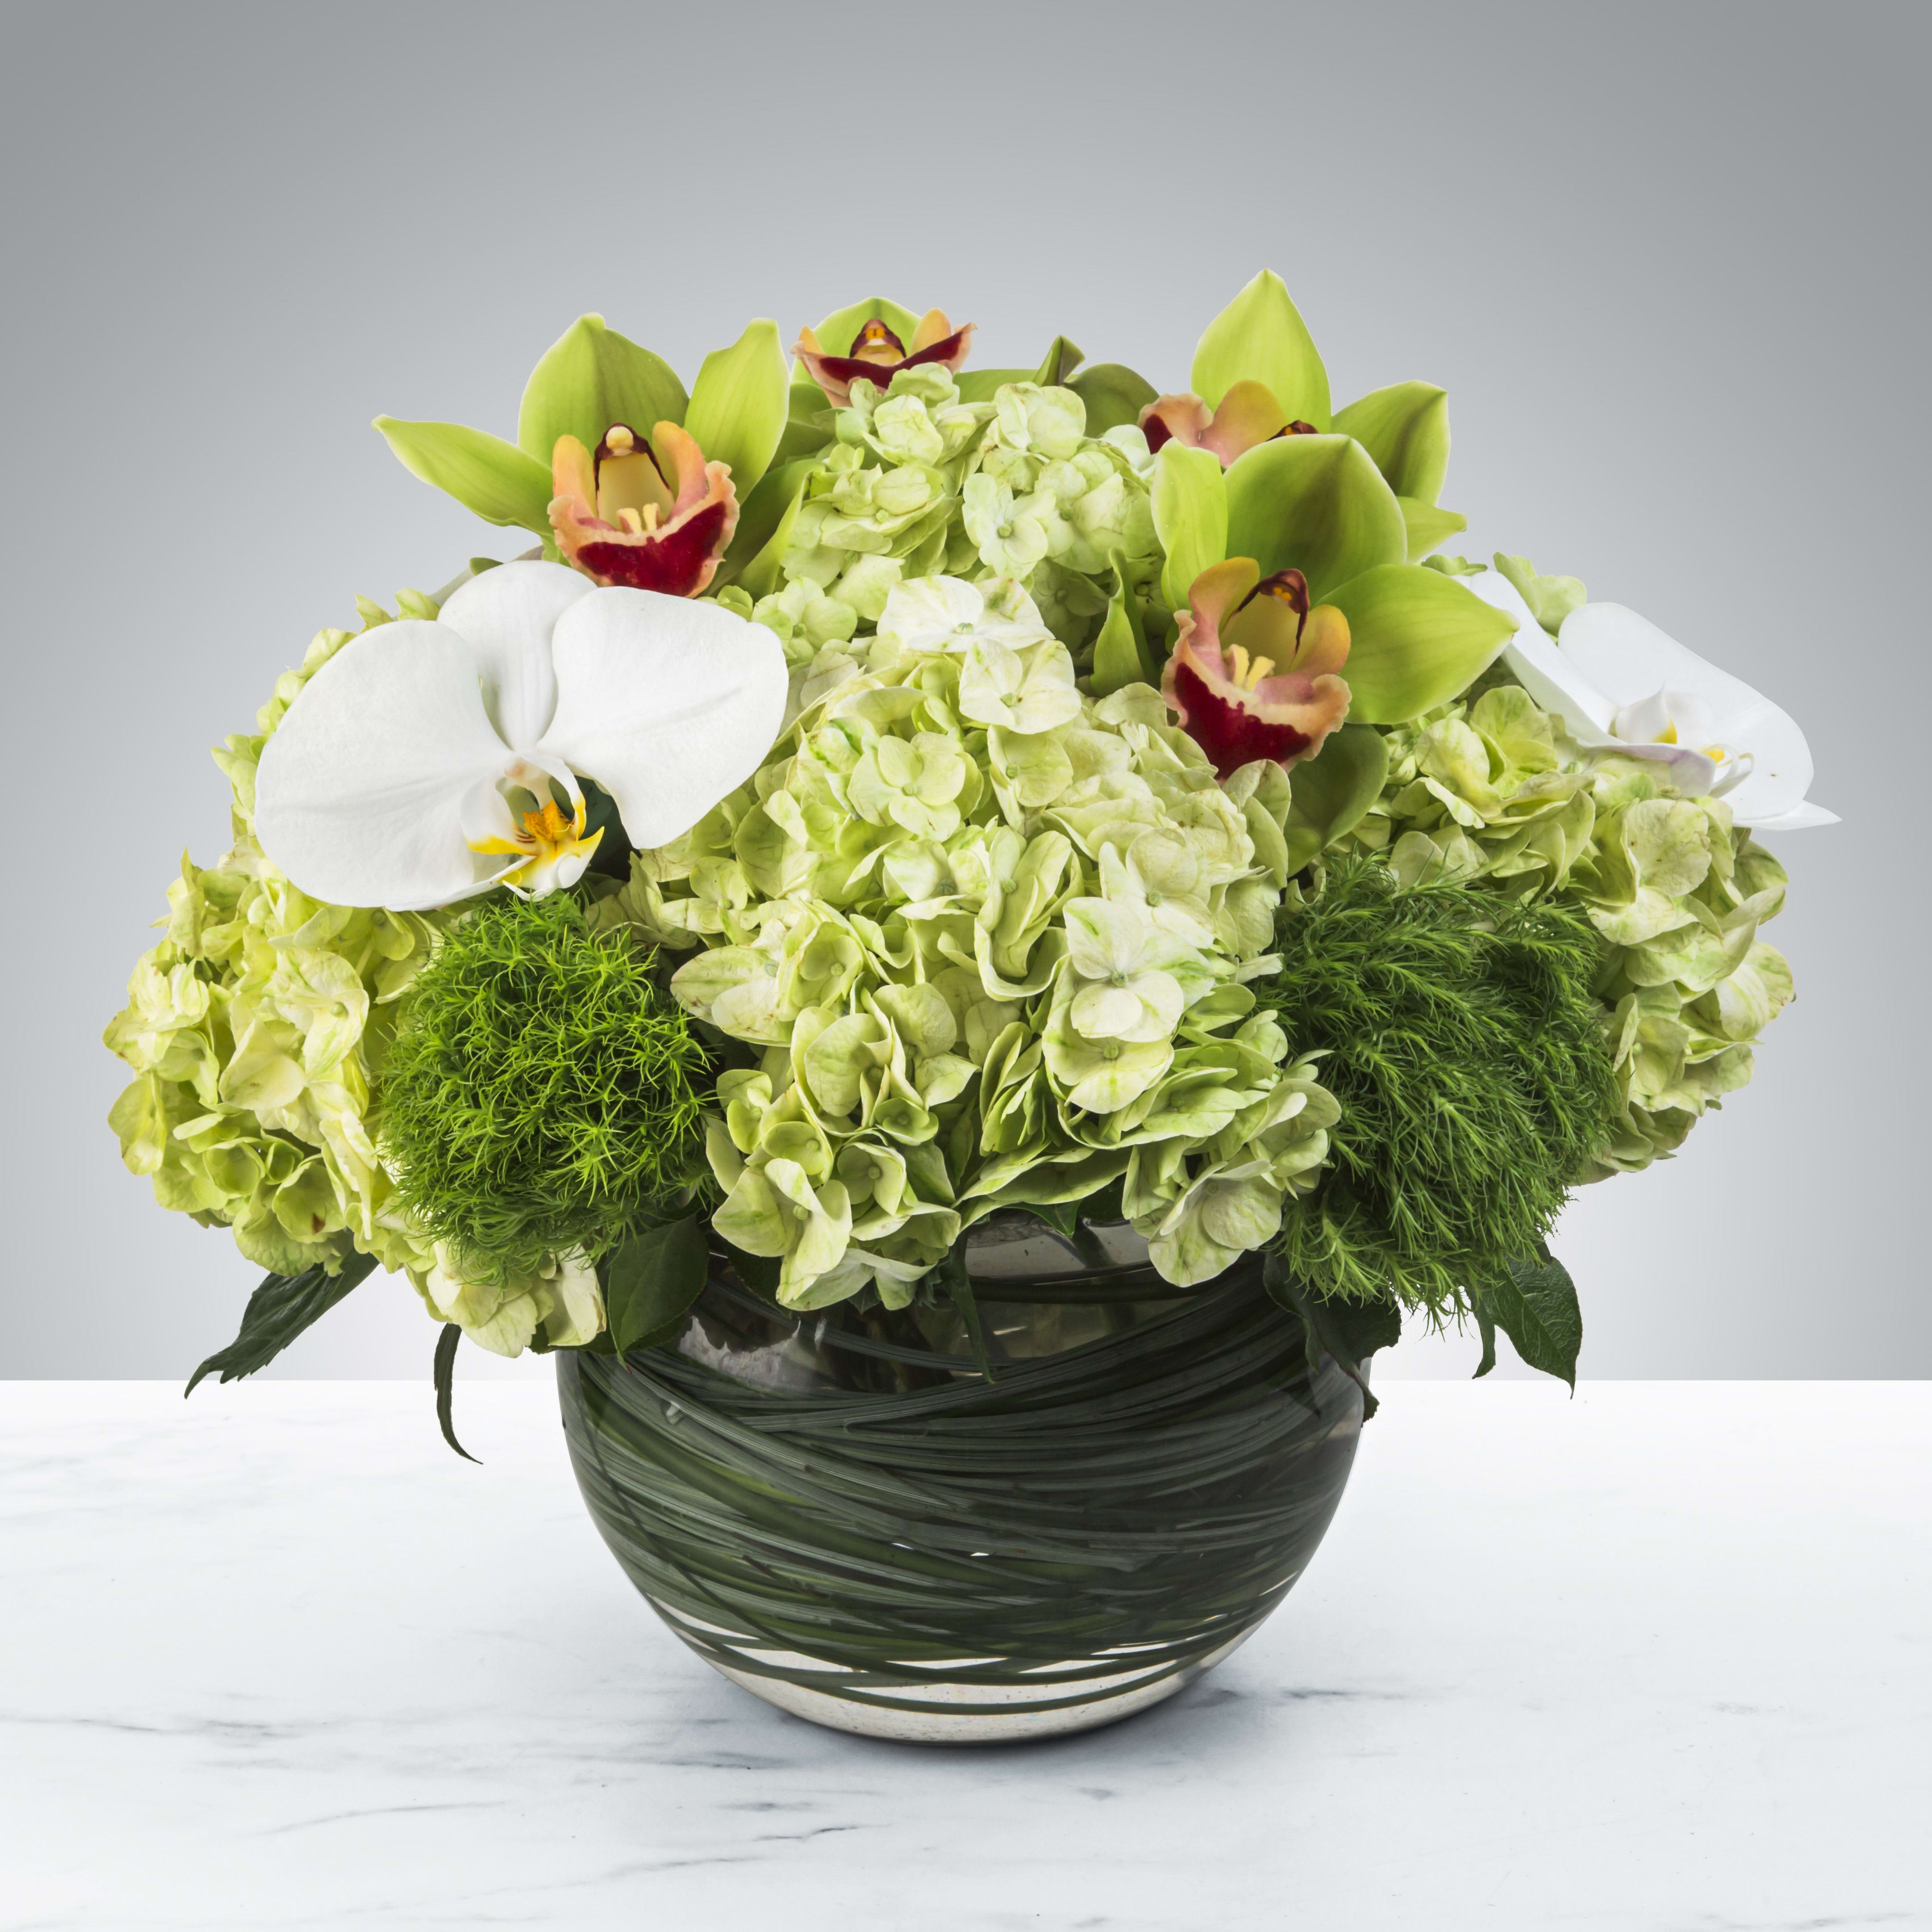 Smiles all Around  - Two different types of orchids and hydrangea come together for this bubble bowl of blooms. Send it as a gift for Admin Day, Employee Appreciation Week or Boss's Day.   APPROXIMATE DIMENSIONS 16&quot; W X 14&quot; H